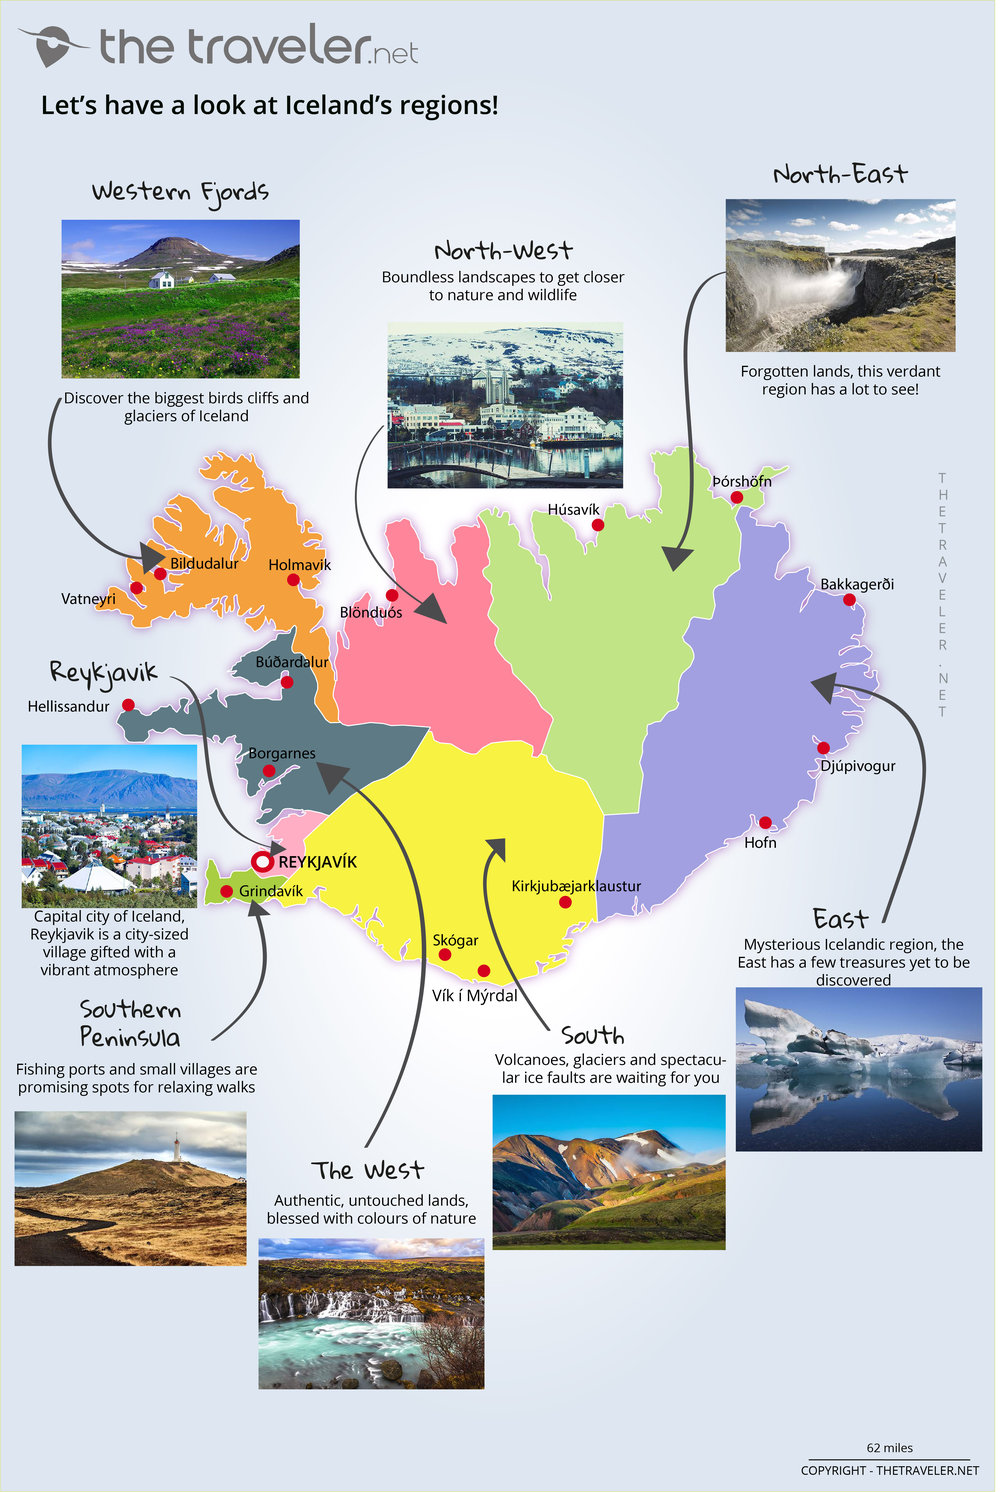 tourism board of iceland